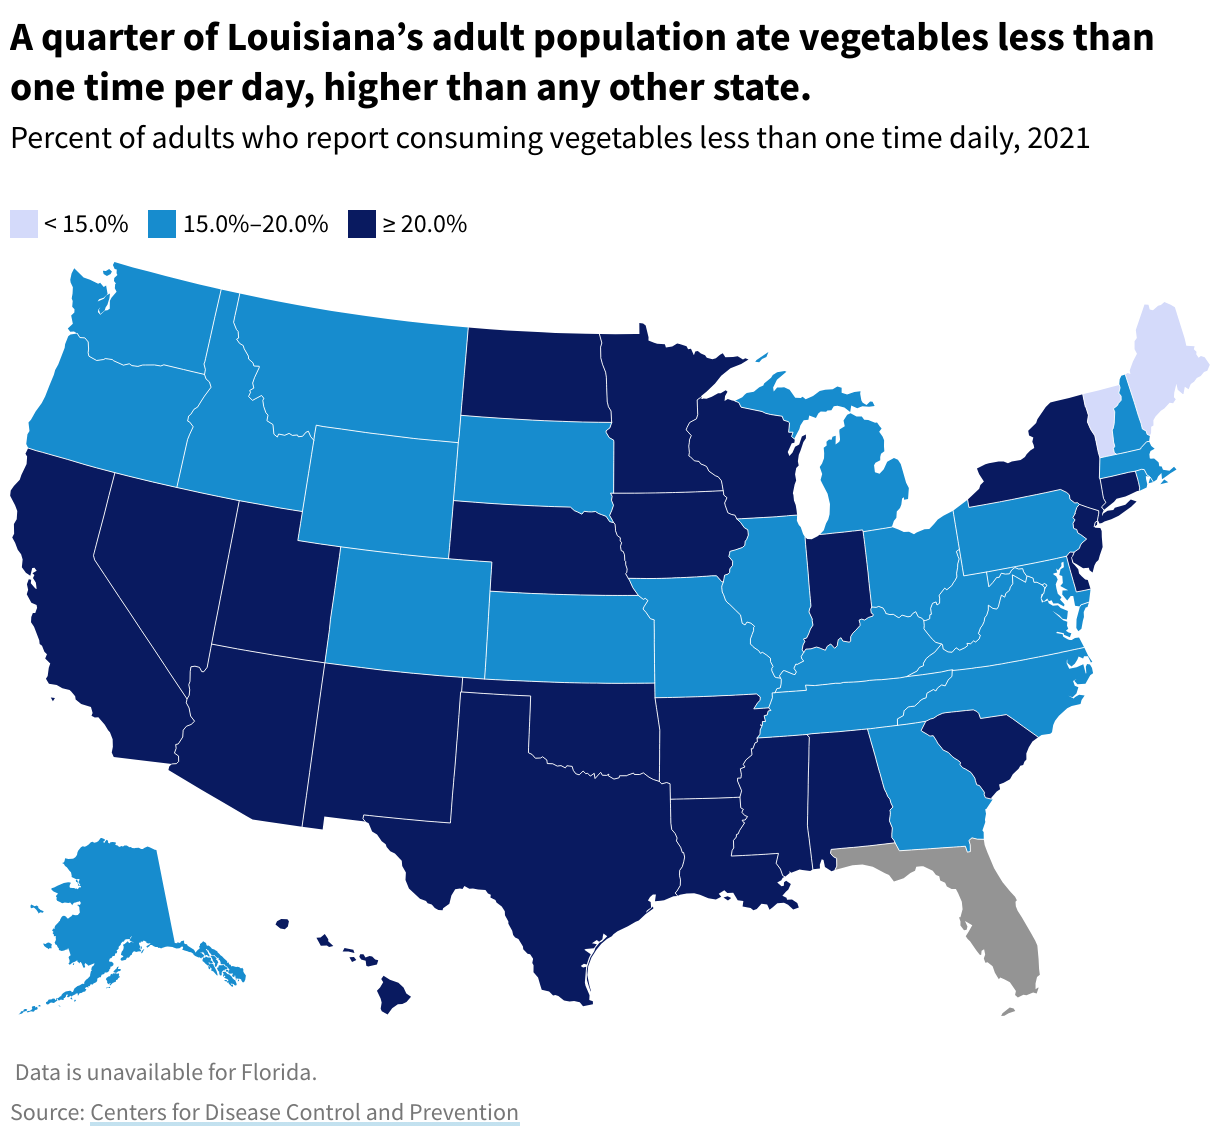 US map showing percent of adults who report consuming vegetables less than one time daily in 2021. A quarter of Louisiana’s adult population ate vegetables less than one time per day, higher than any other state.